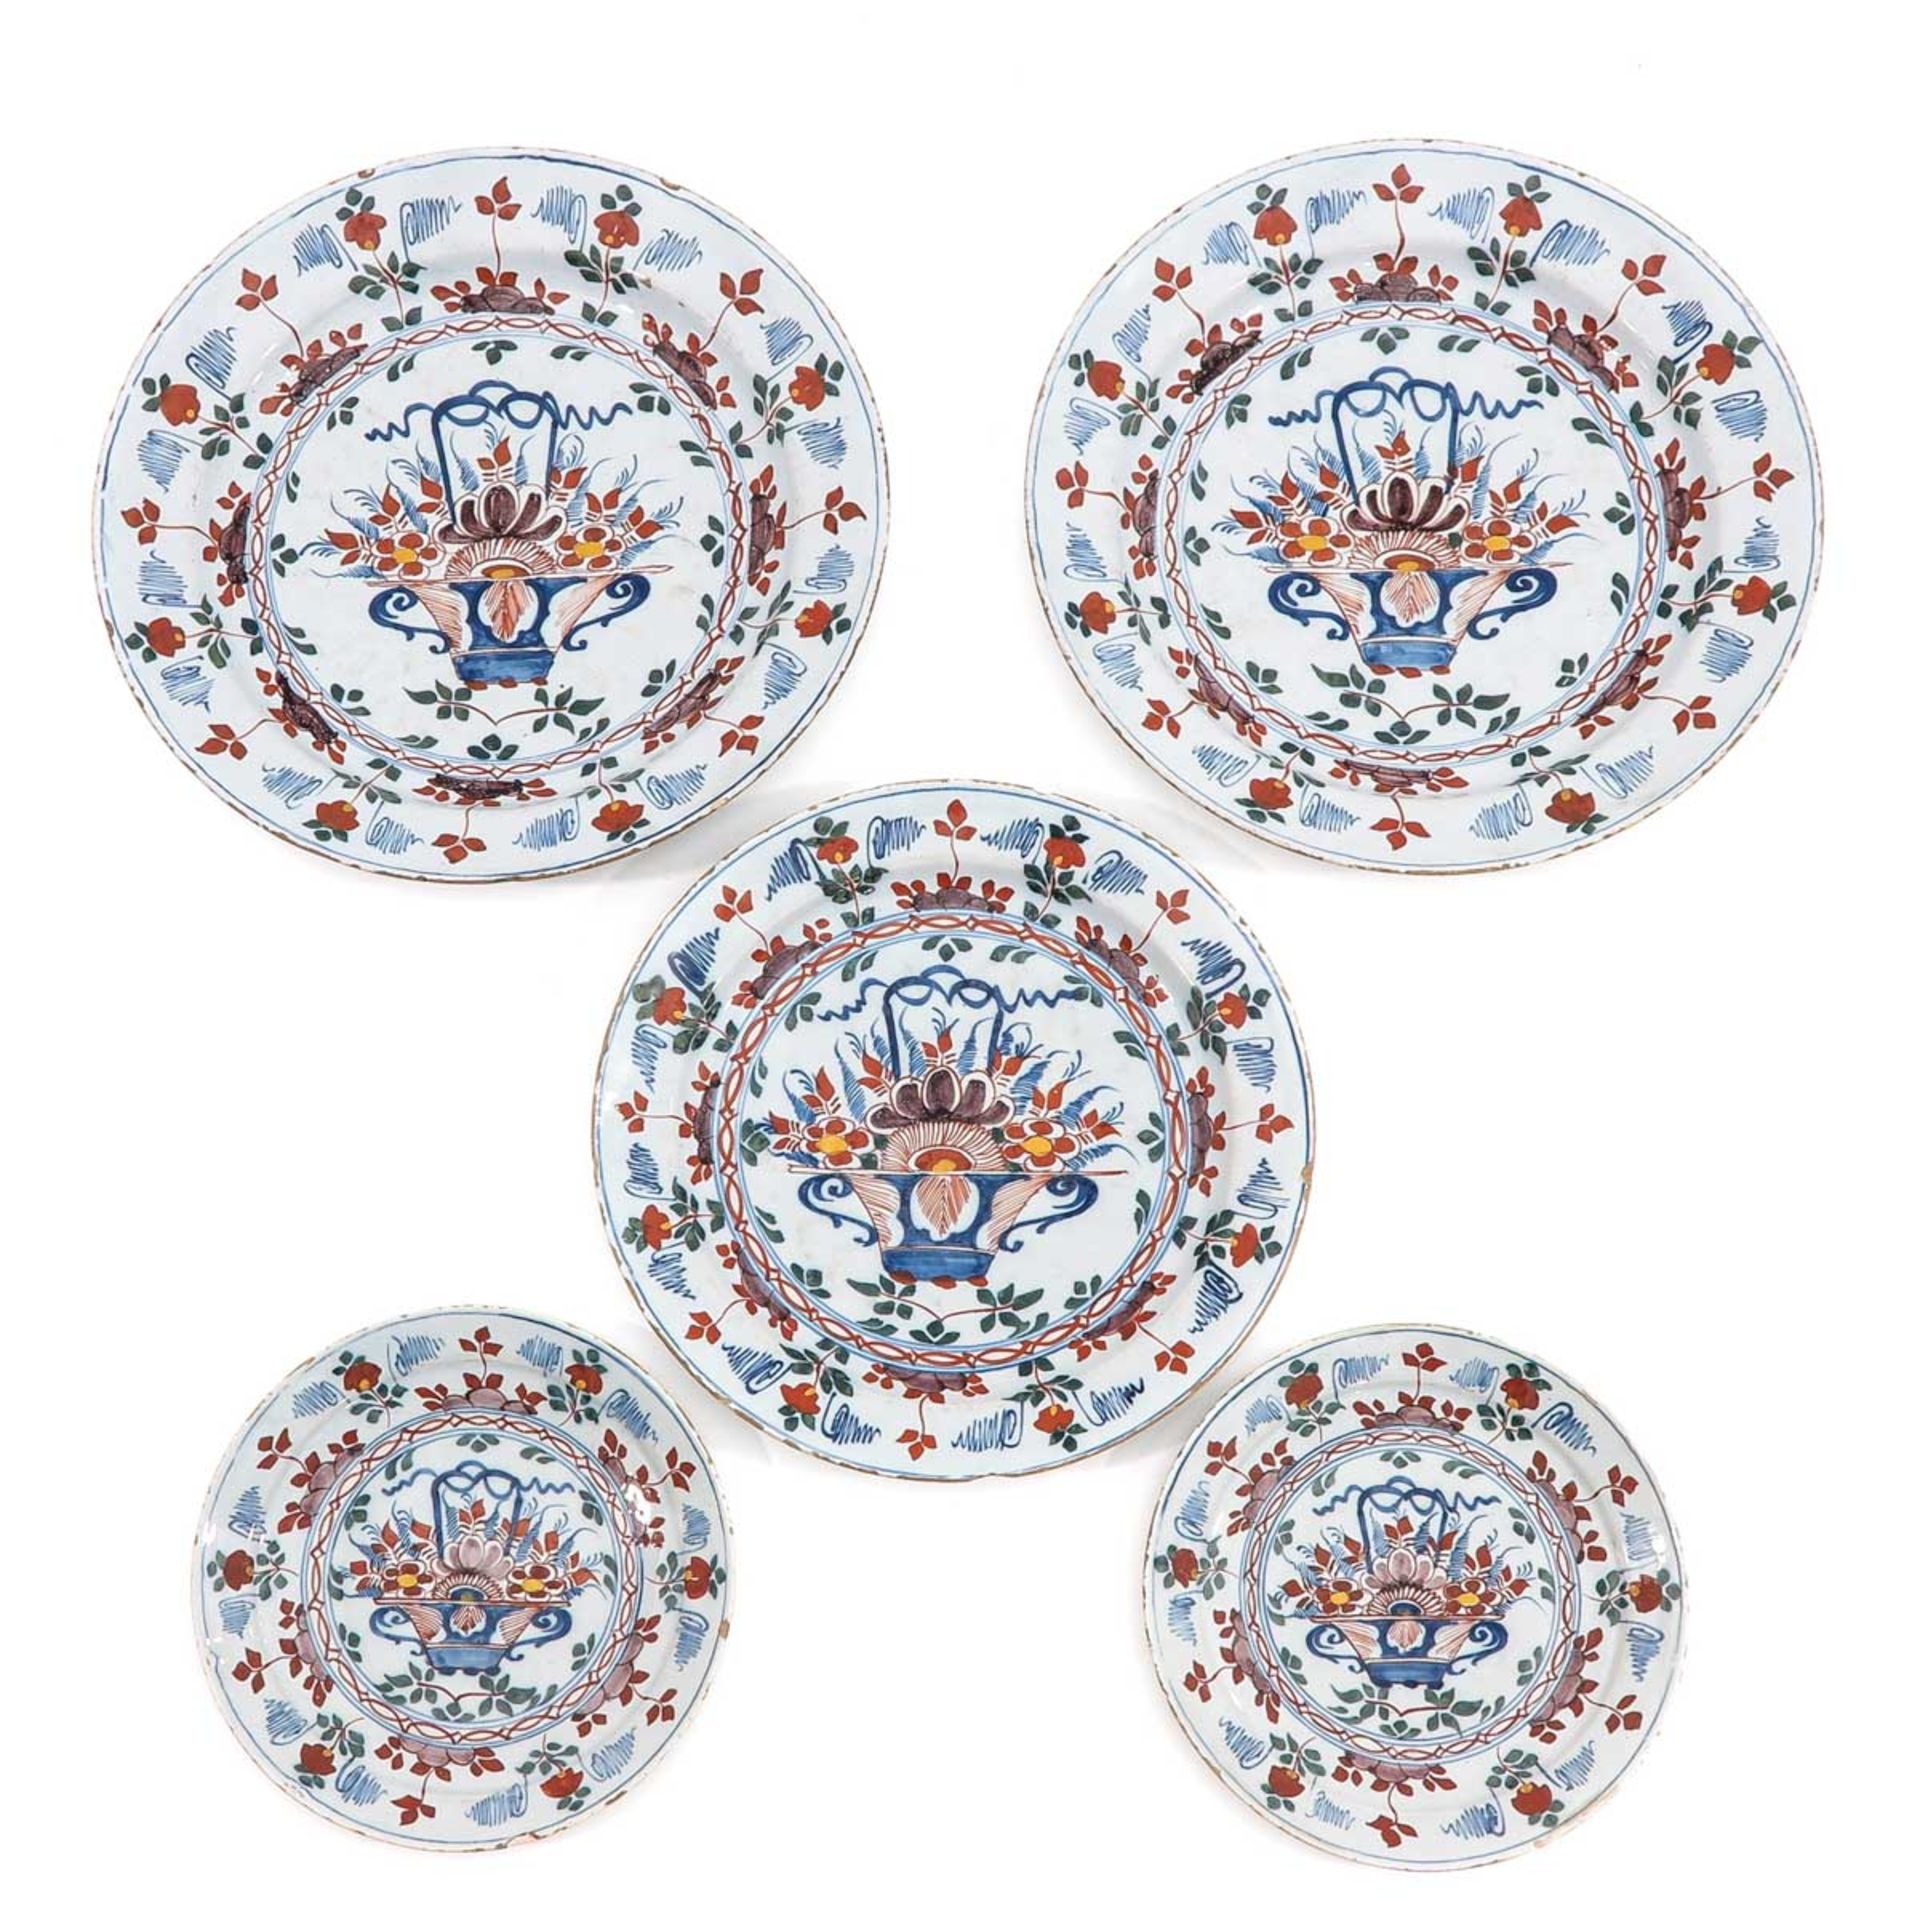 A Lot of 5 18th Century Delft Plates